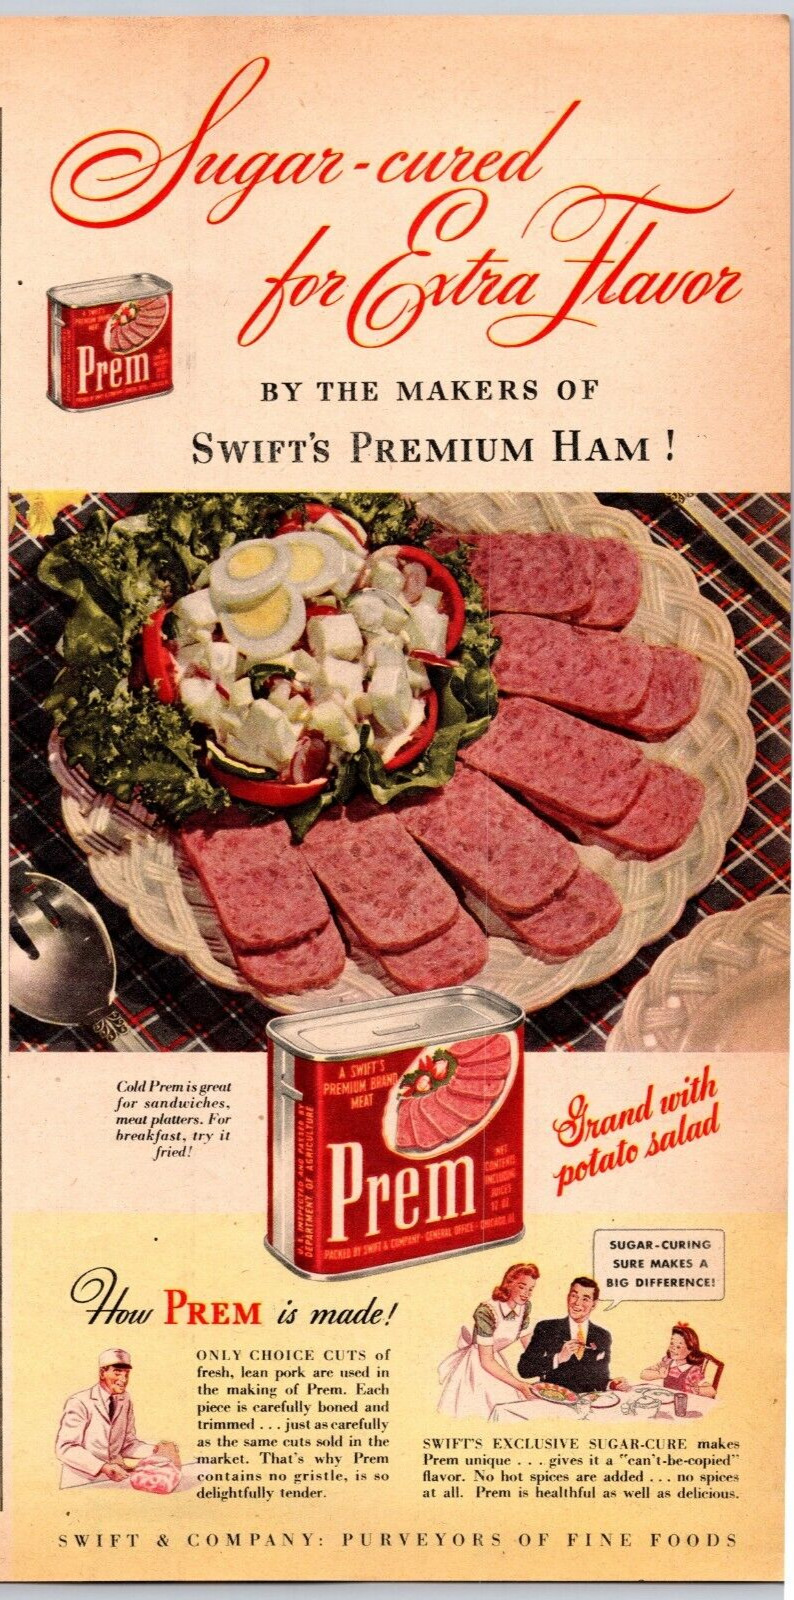 1941 Print Ad Swift\'s Prem Sugar Cured for Extra Flavor Grand with Potato Salad